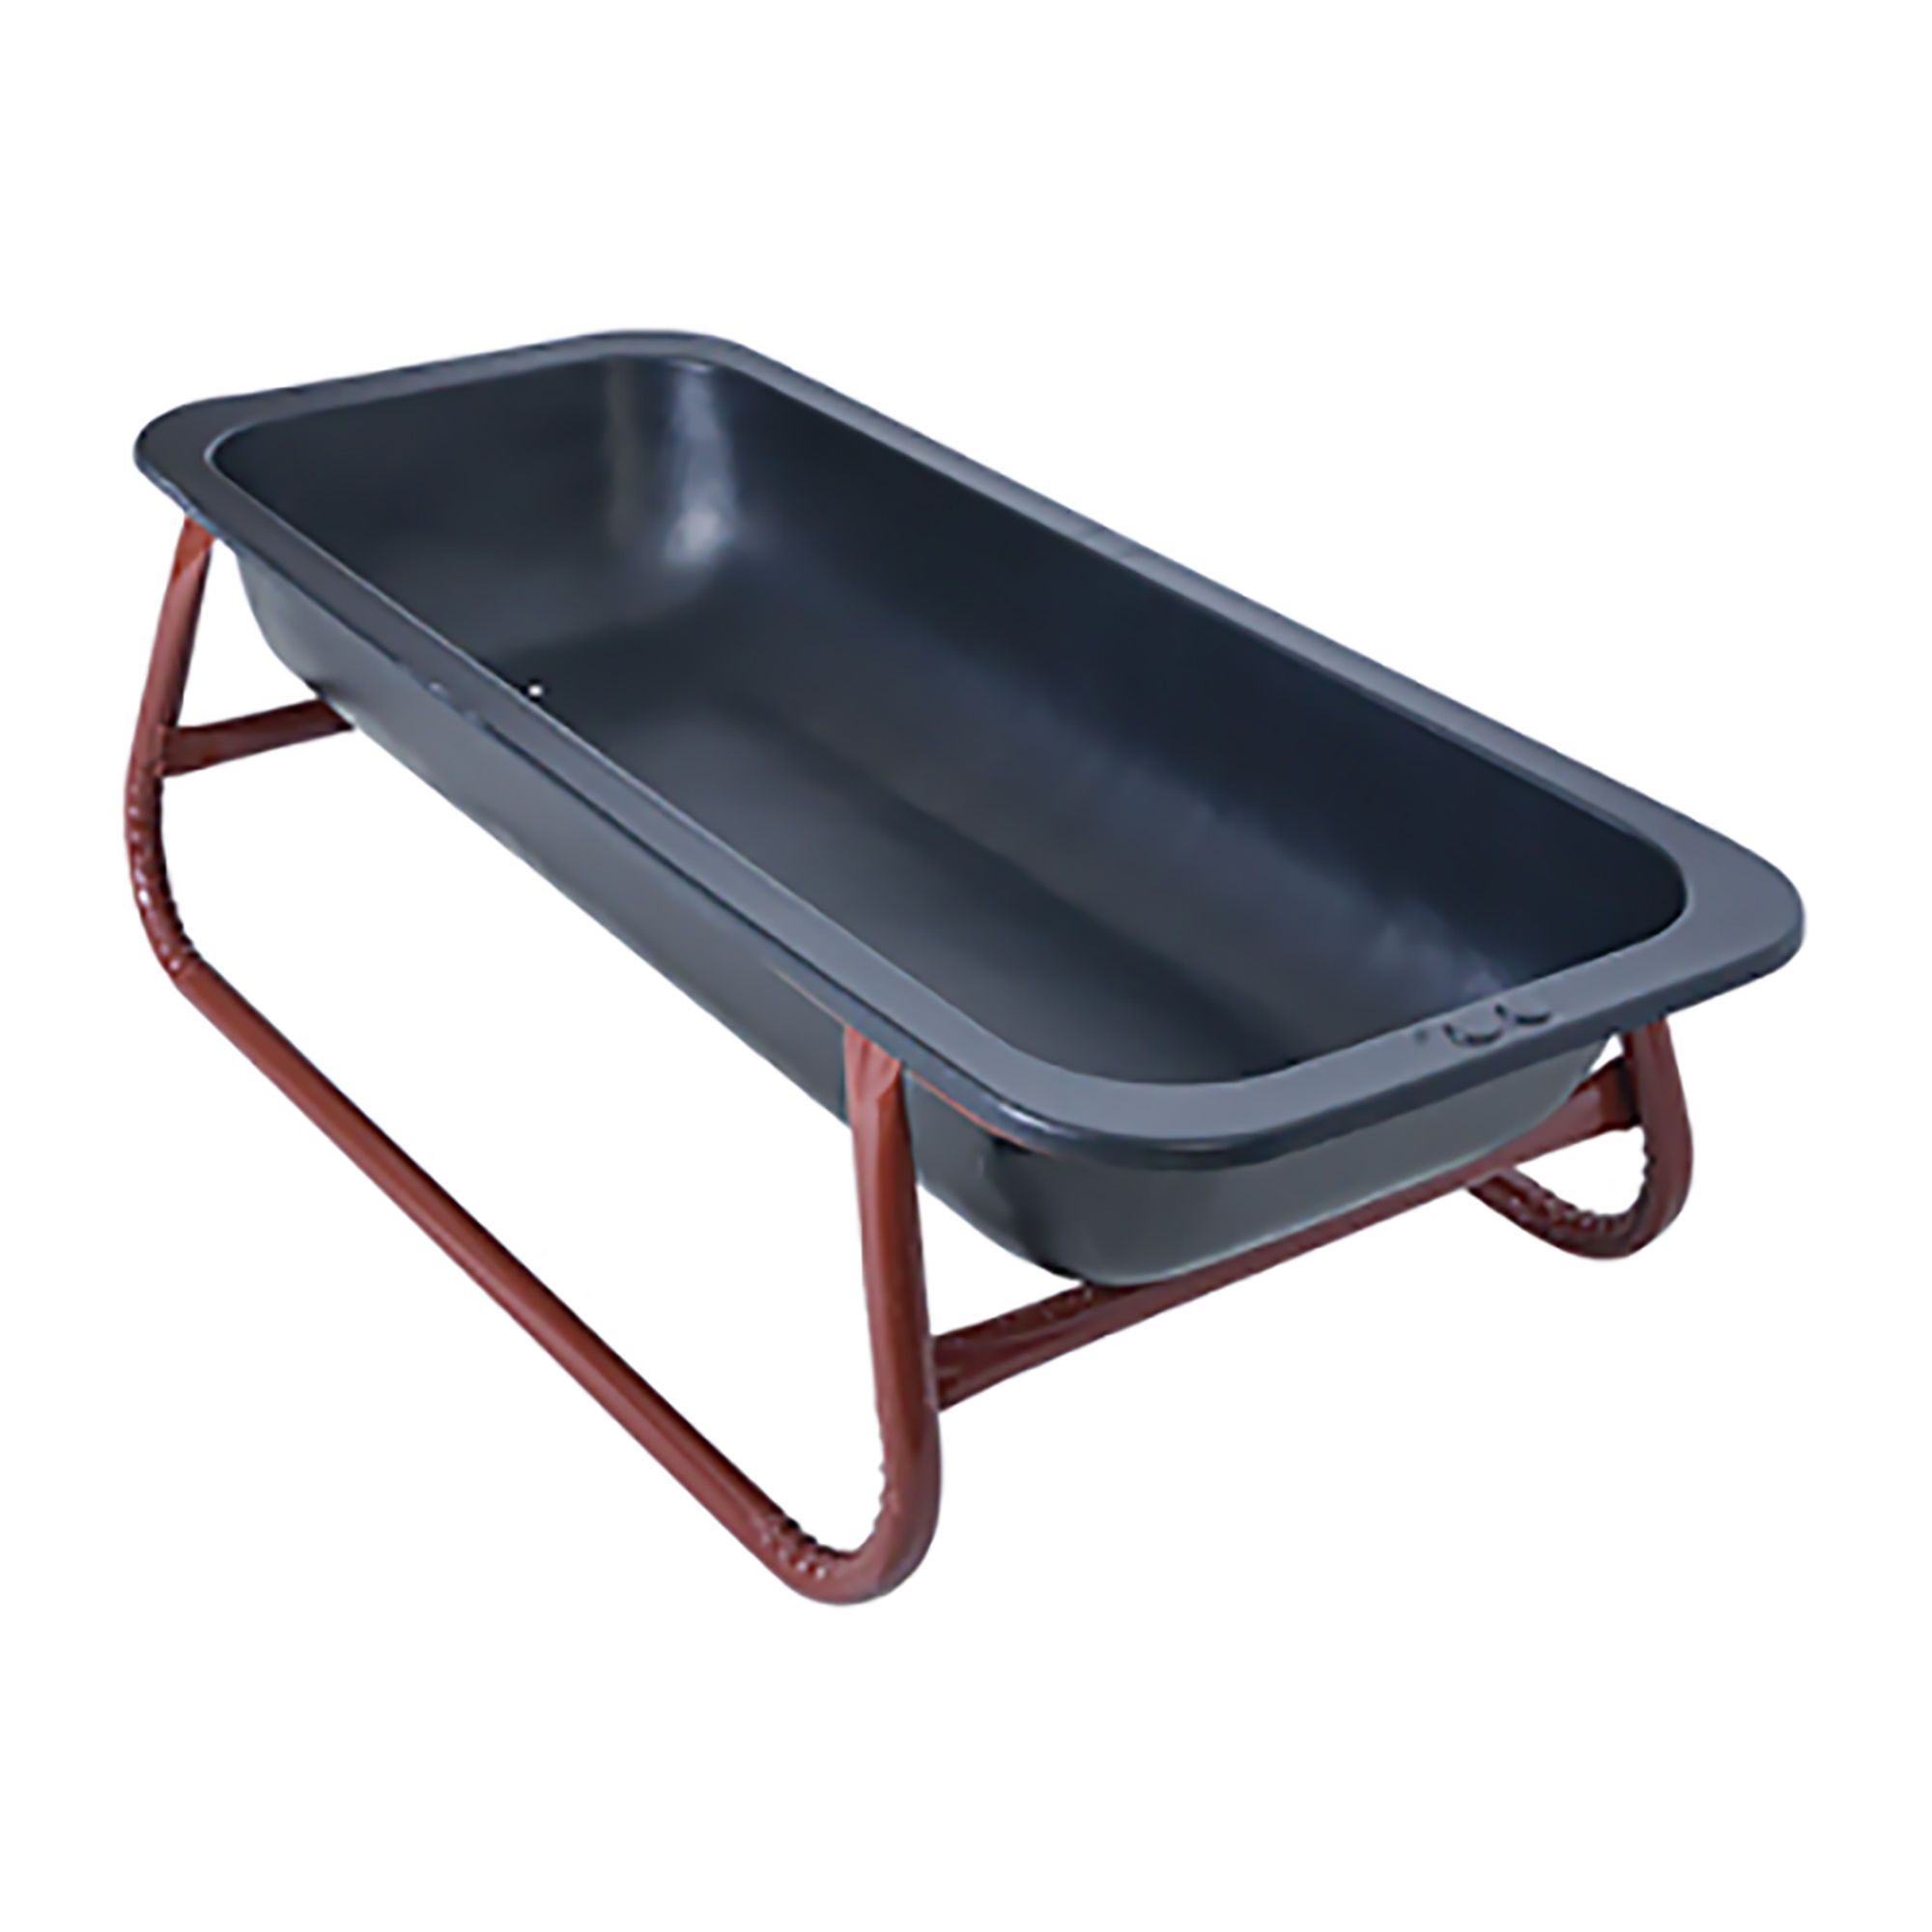  VIRTIONZ 11' Red Hay Hook 47010500 Feeders Fonts Troughs Farm, 2  Pack : Patio, Lawn & Garden